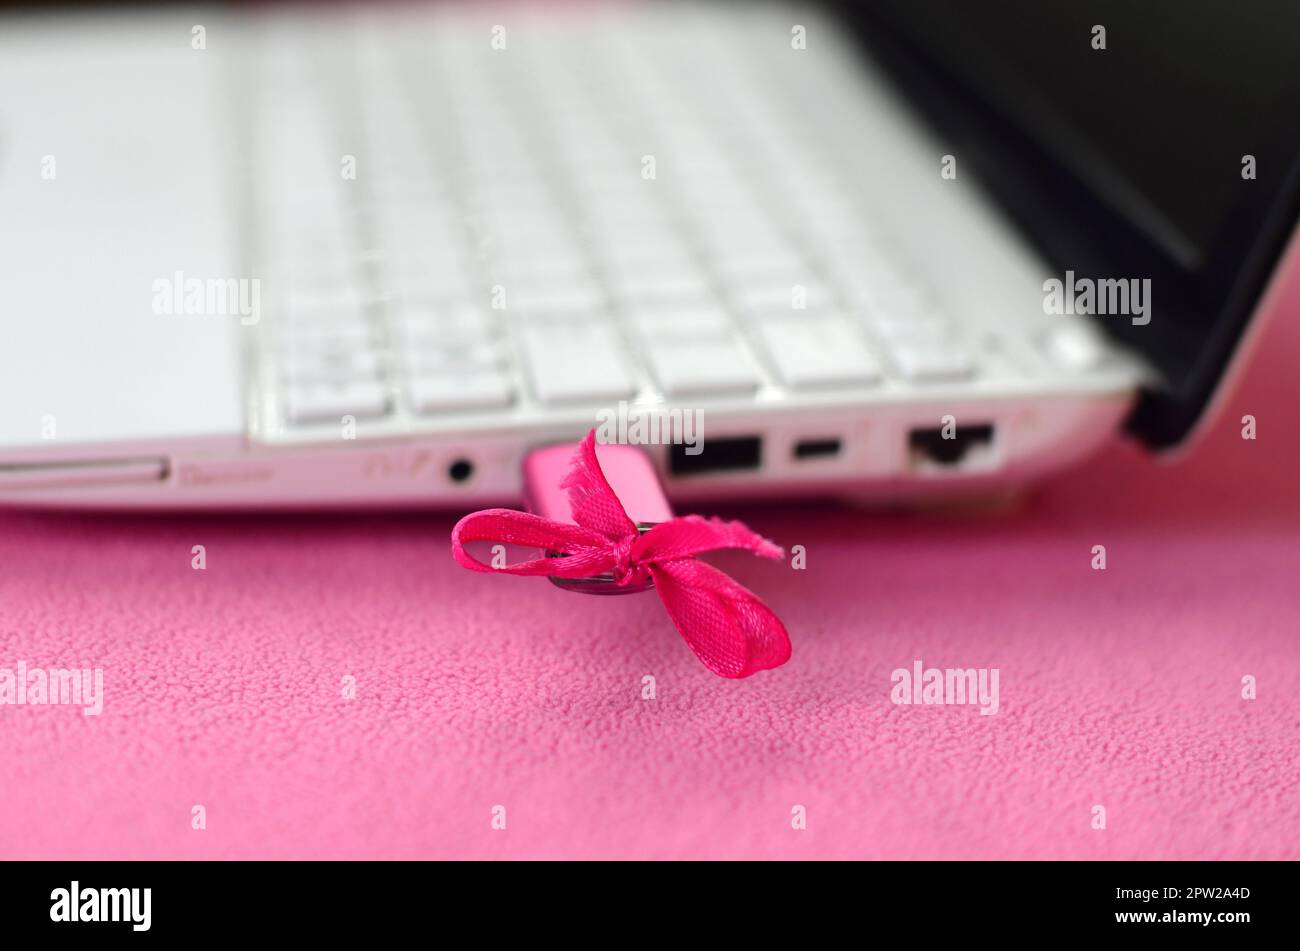 A brilliant pink USB flash drive with a pink bow is connected to a white laptop, which lies on a blanket of soft and fluffy light pink fleece fabric. Stock Photo